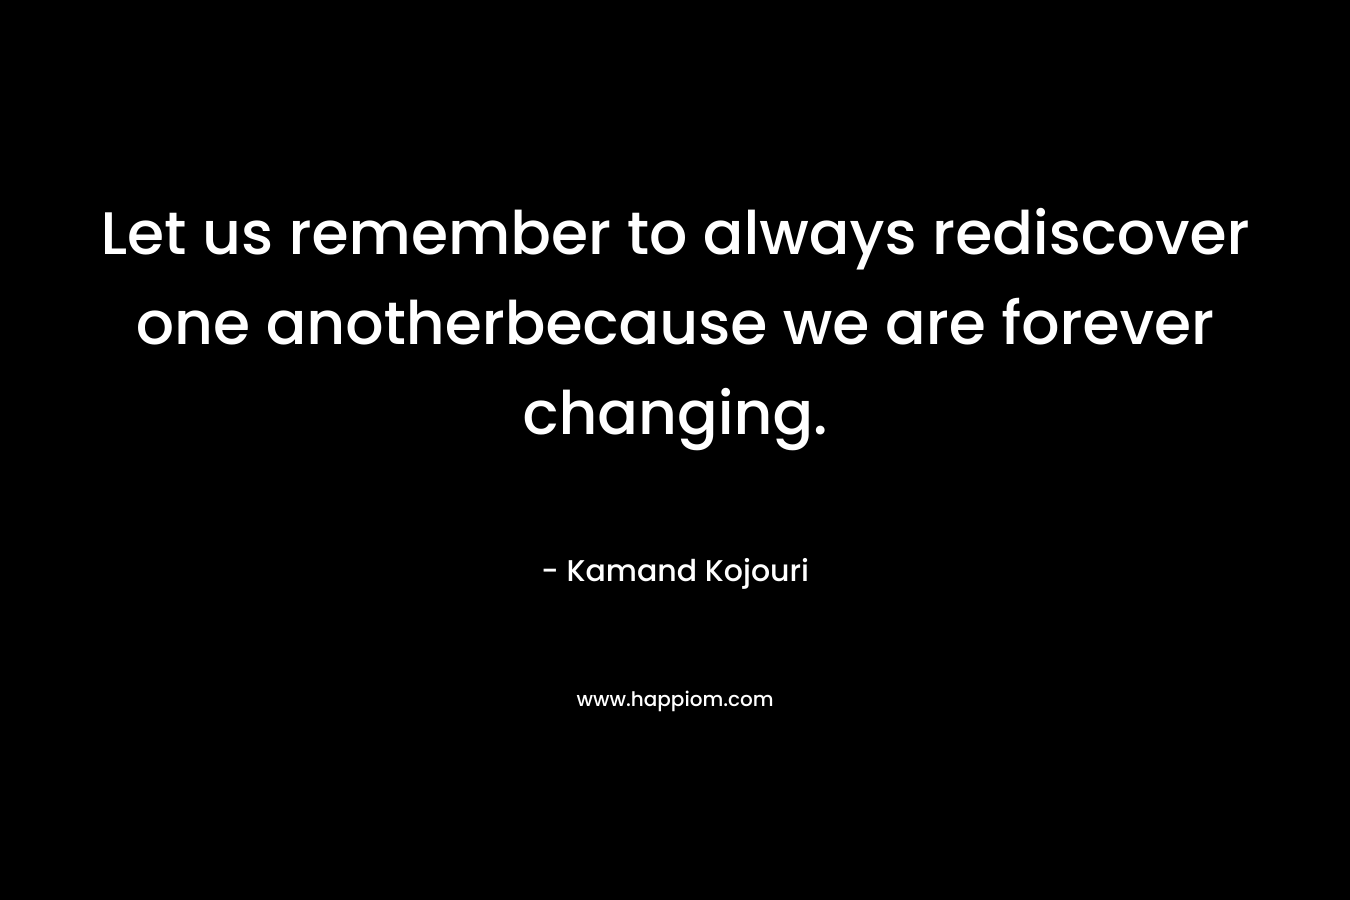 Let us remember to always rediscover one anotherbecause we are forever changing.